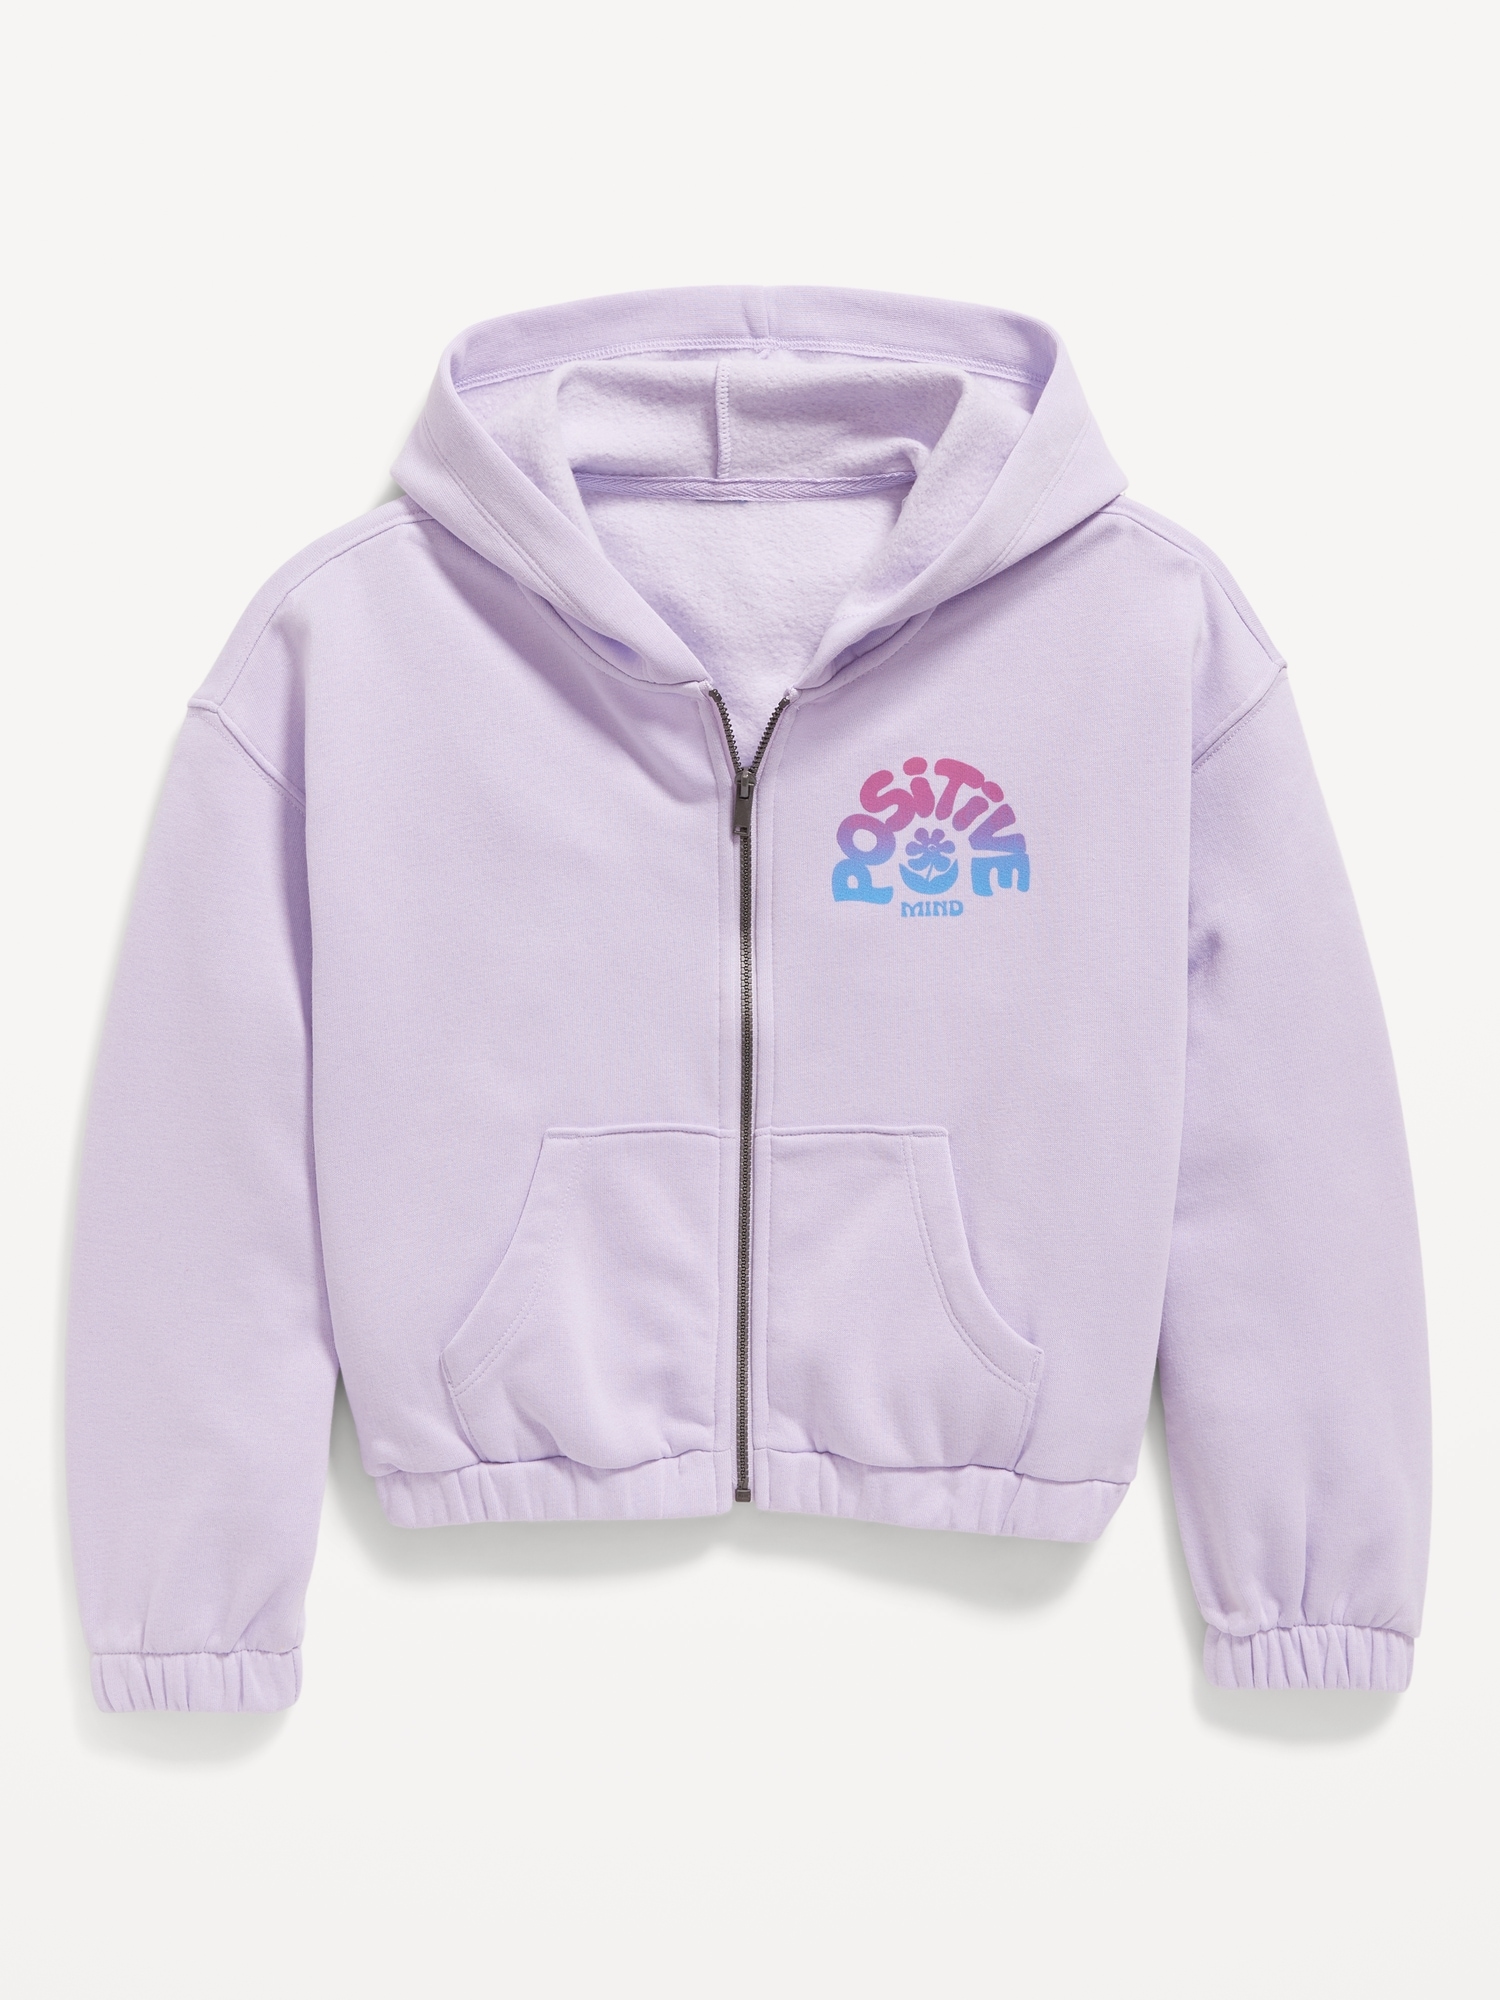 Cinched-Hem Graphic Zip Hoodie for Girls | Old Navy